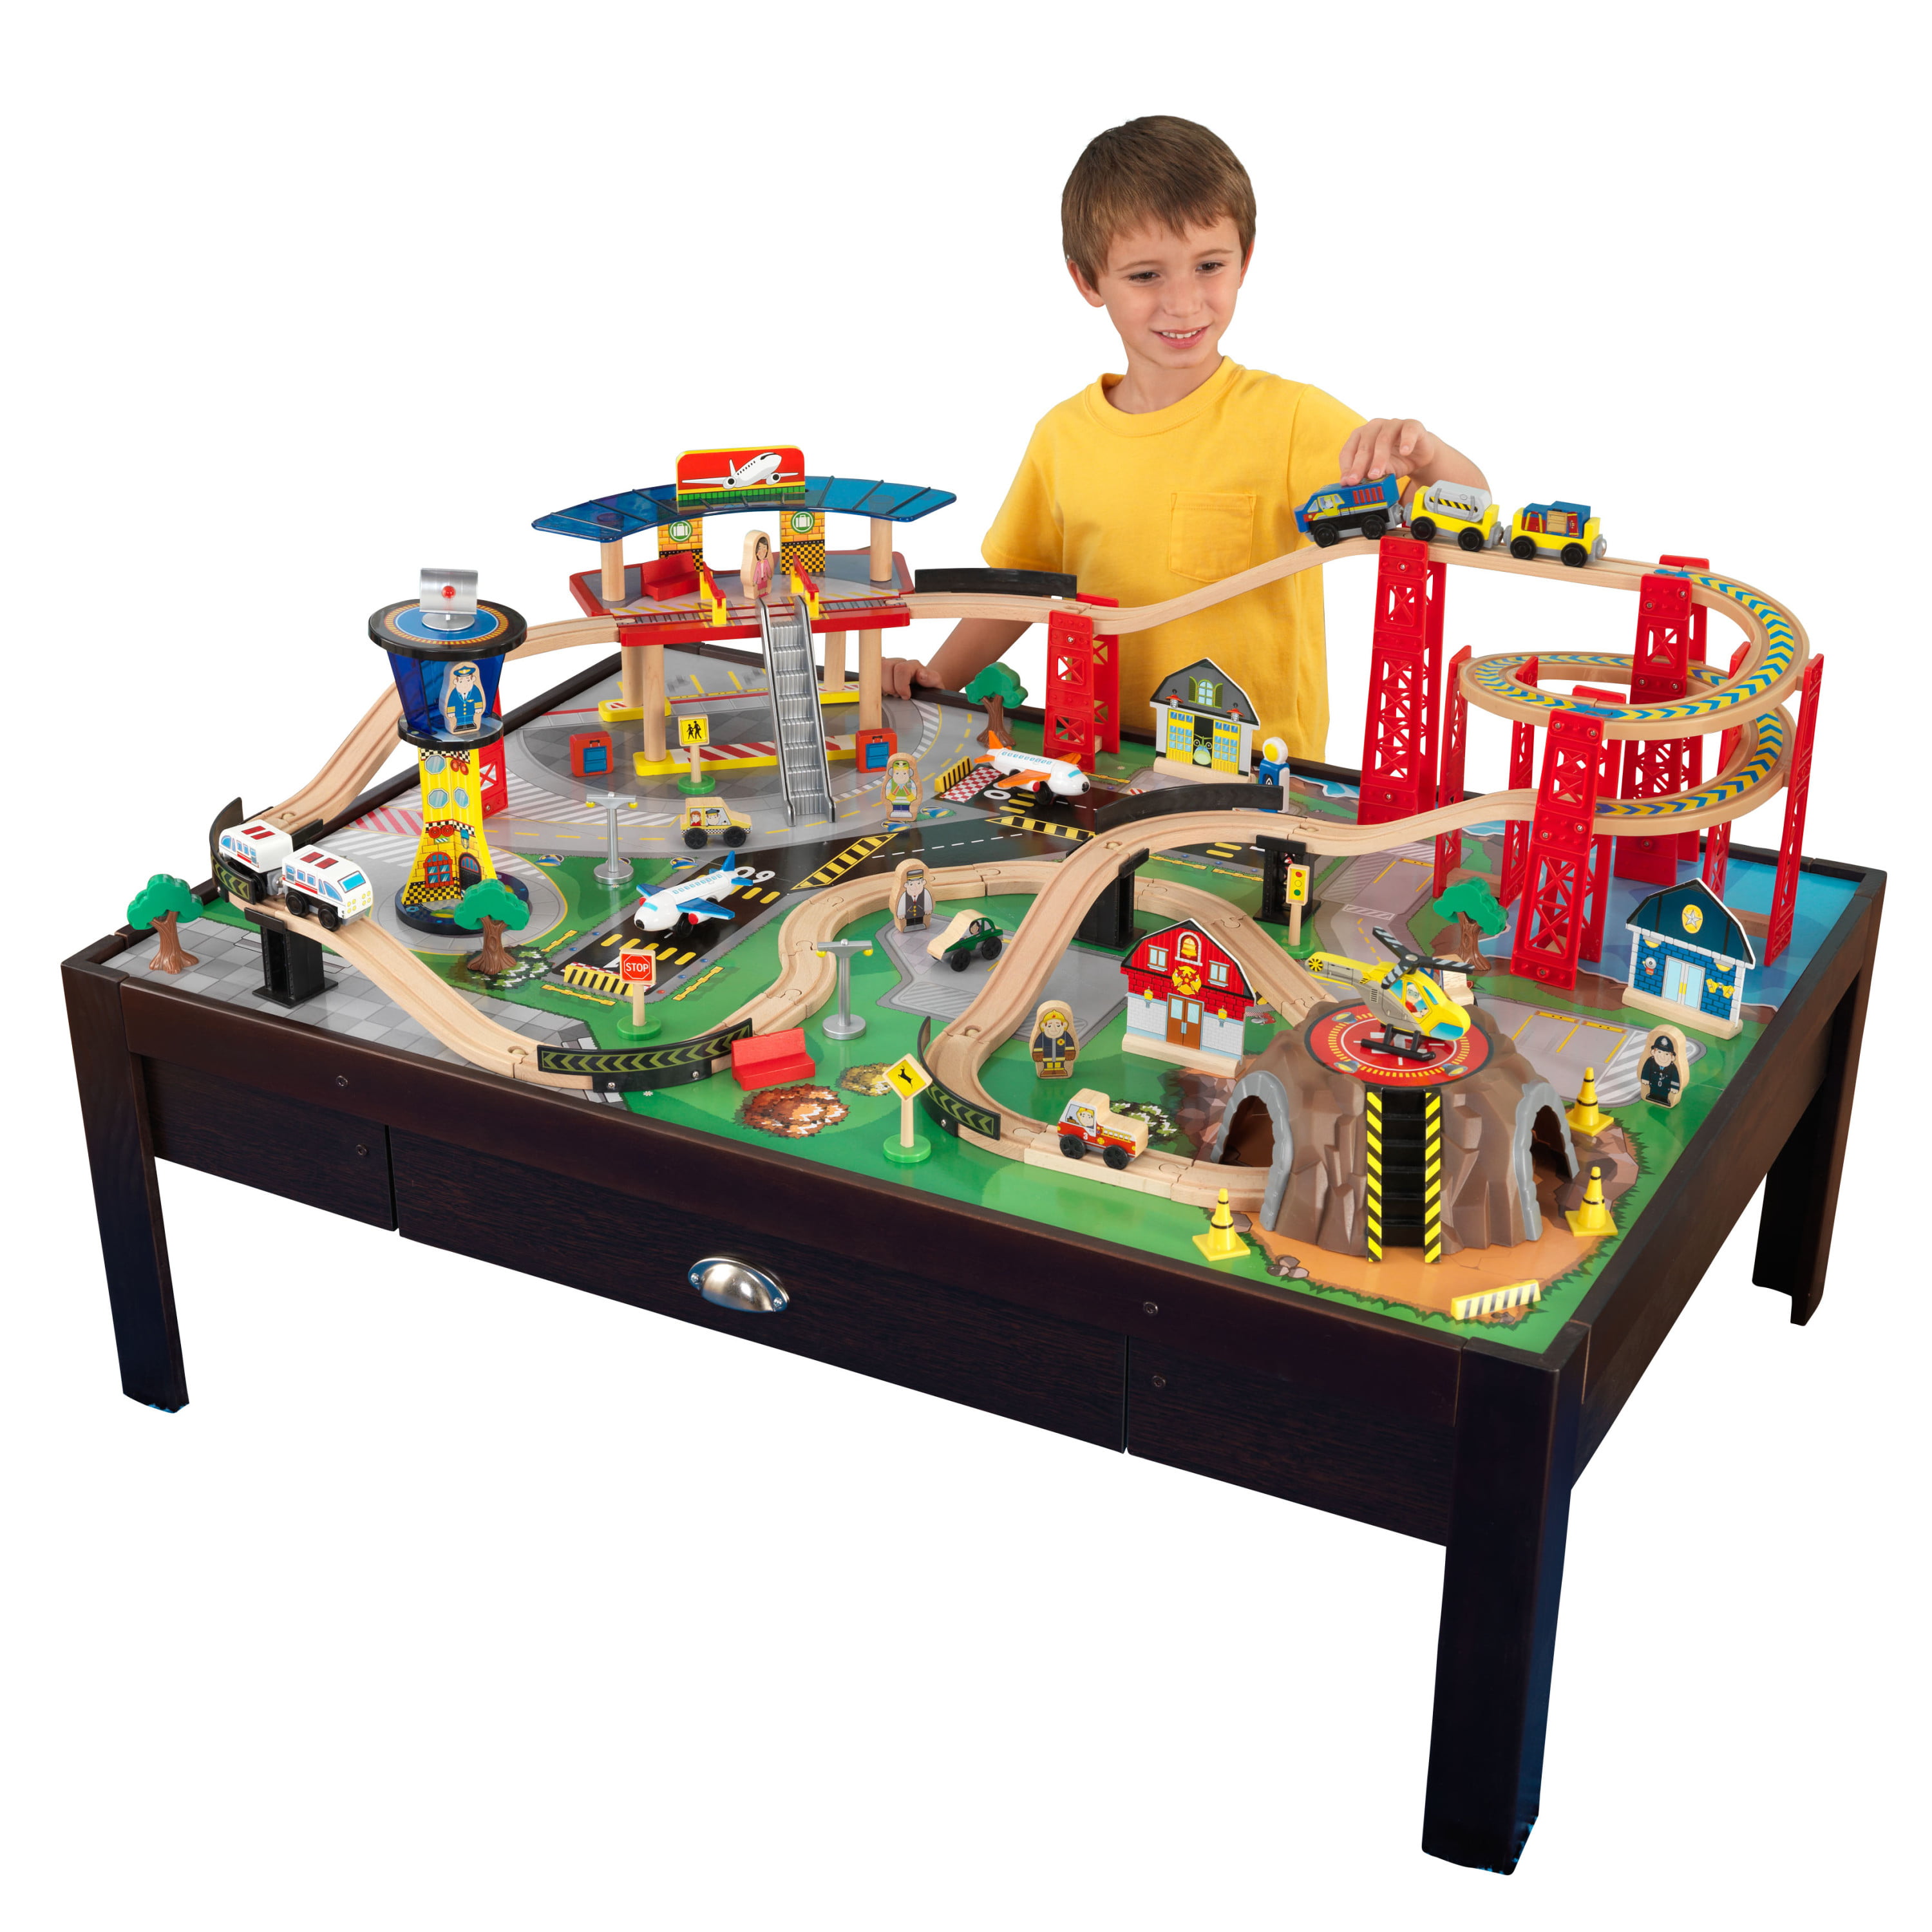 DIY Design City Playset Table w/Lockable Wheels Costzon Train Table Track Railway Wooden Train Set Gift for Boys Girls Cars Wood Kids Activity Table w/Storage Drawer 100 Multicolor Pieces 